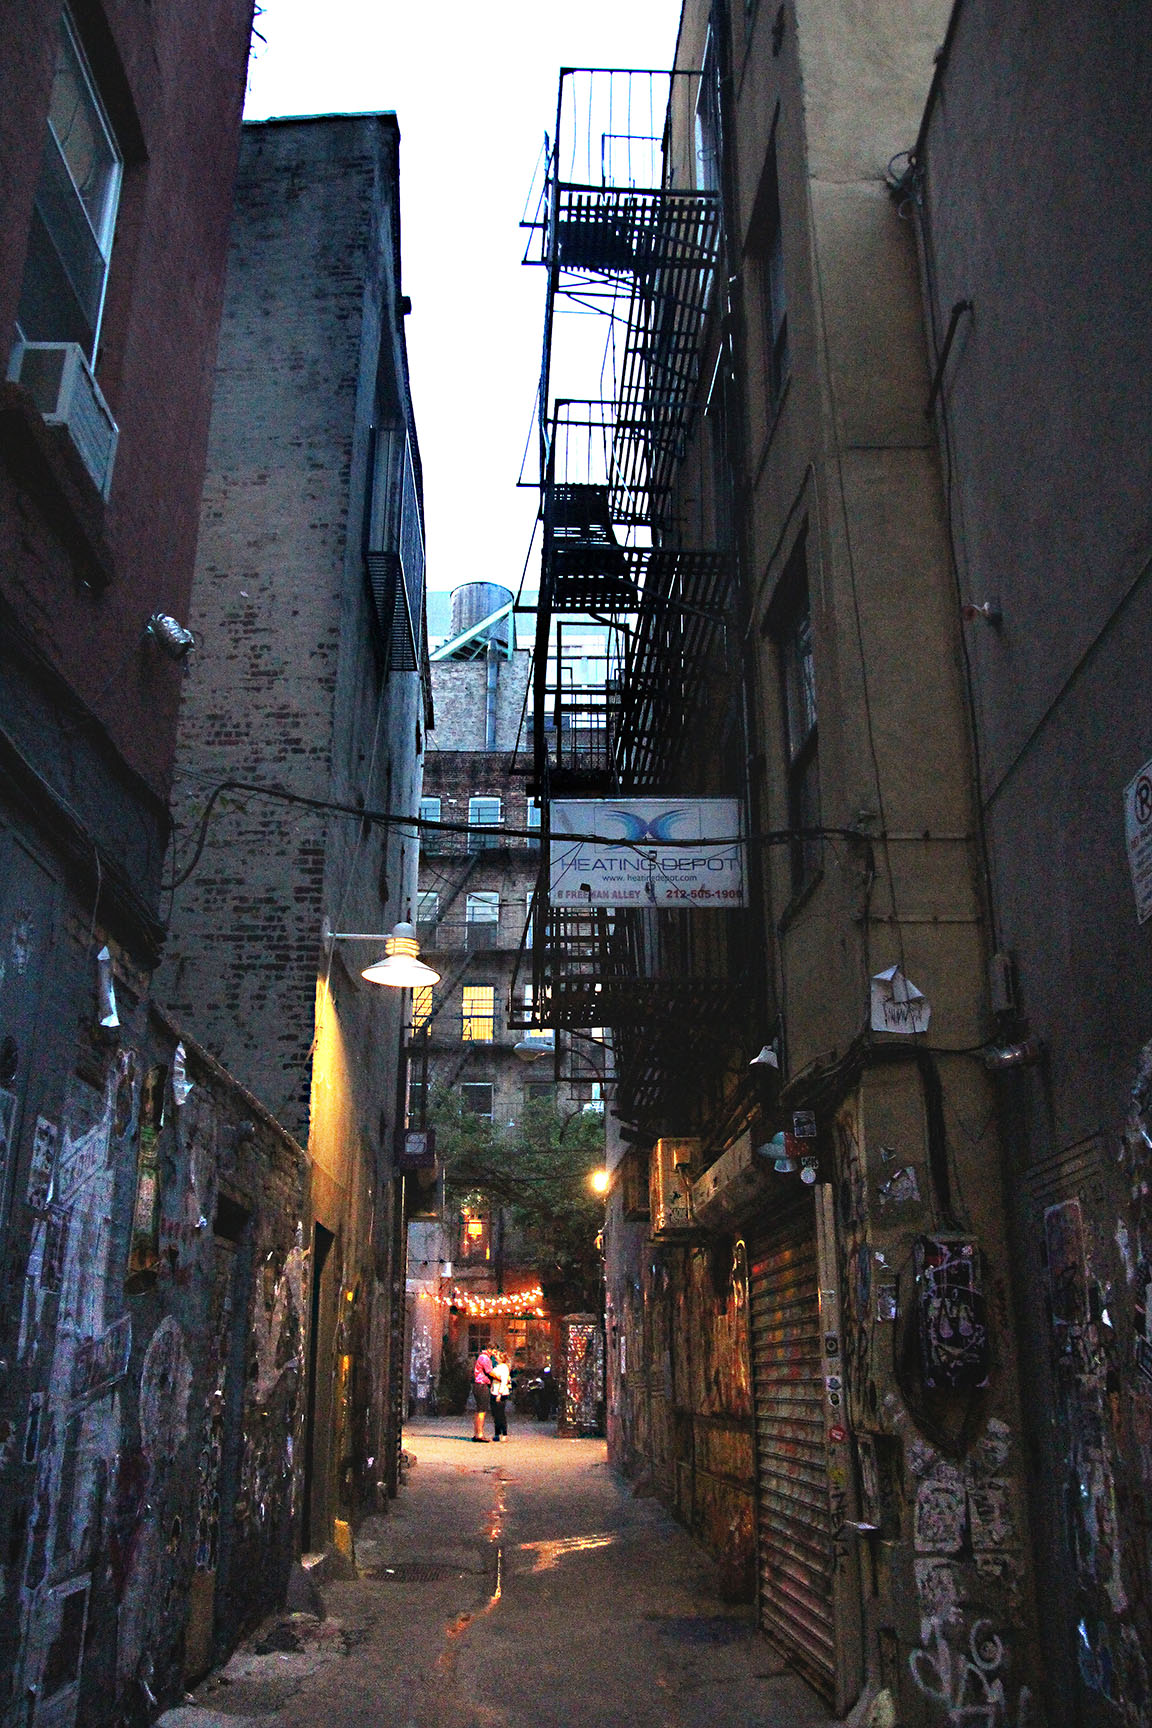 Freemans Alley, NYC